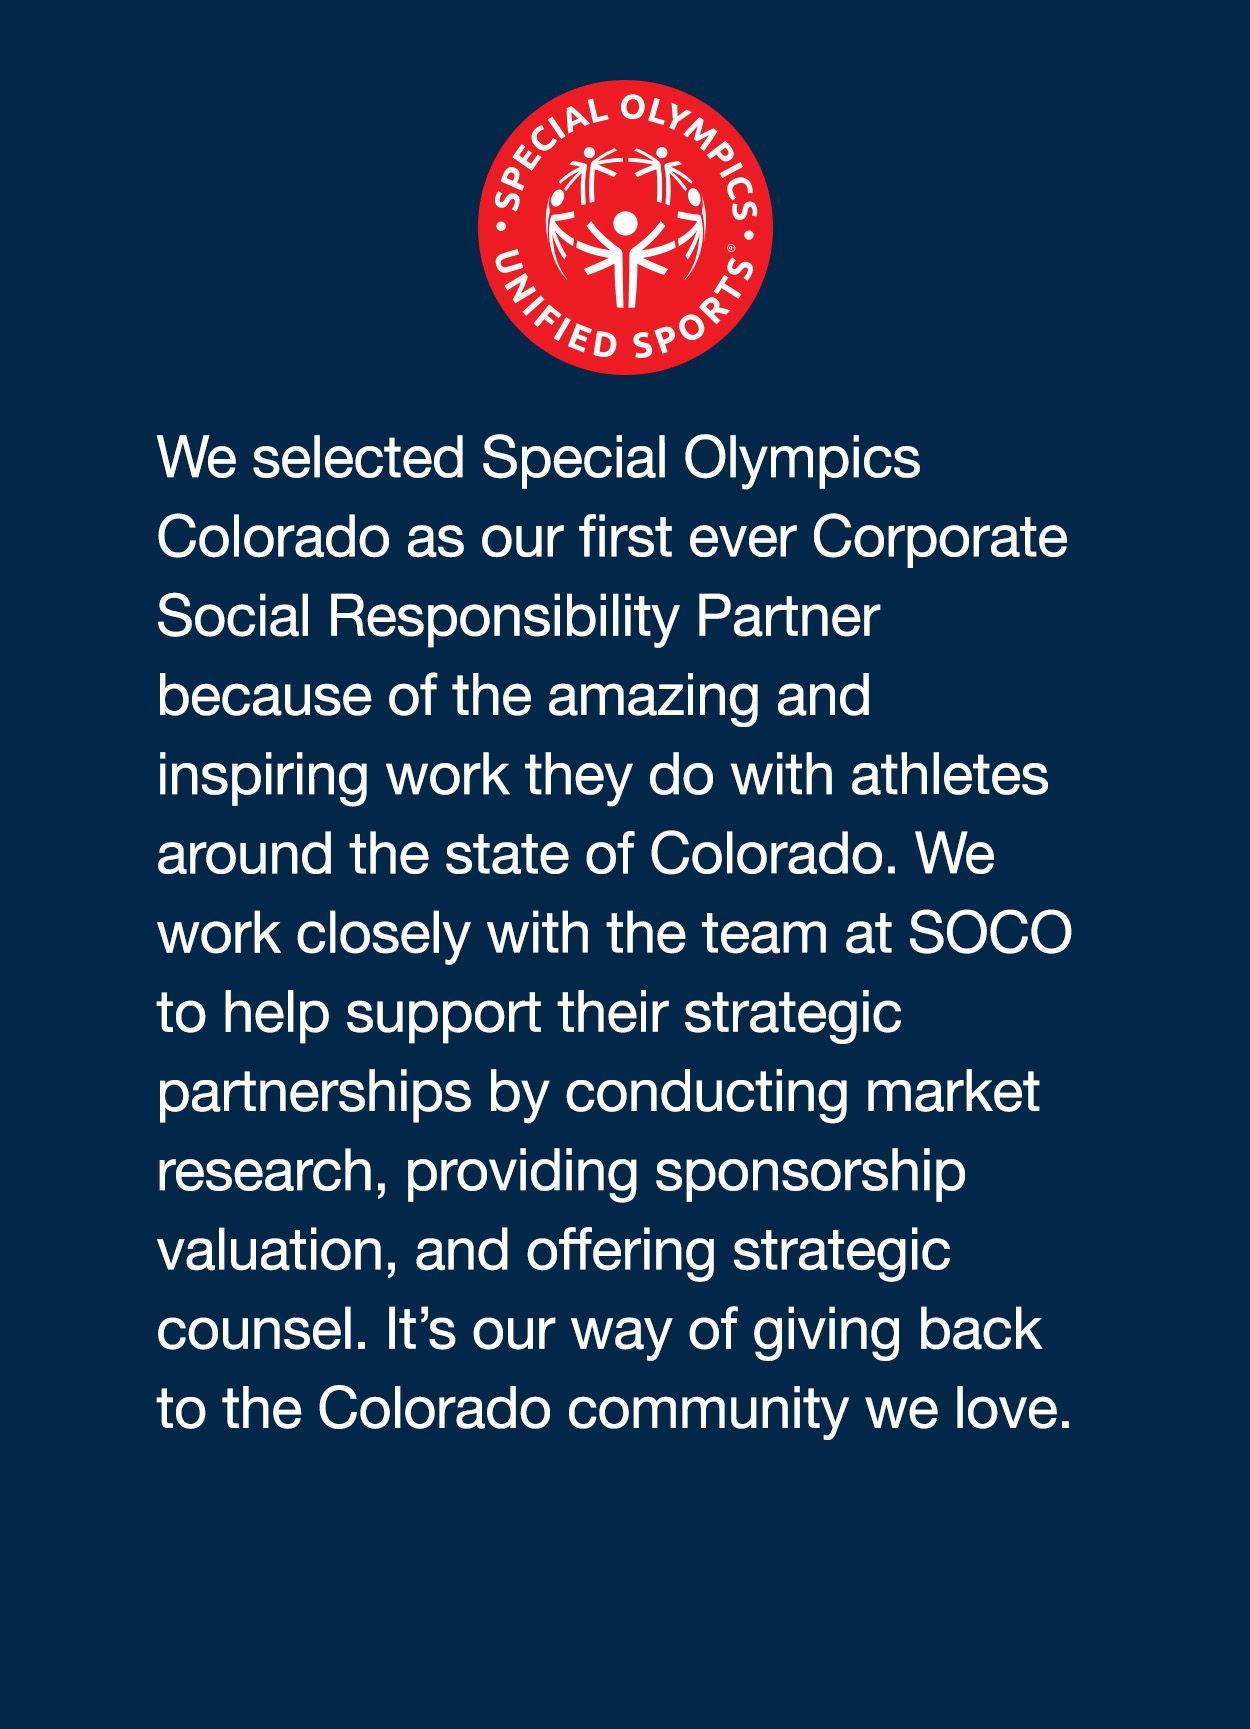 We selected Special Olympics Colorado as our first ever Corporate Social Responsibility Partner because of the amazing and inspiring work they do with athletes around the state of Colorado. We work closely with the team at SOCO to help support their strategic partnerships by conducting market research, providing sponsorship valuation, and offering strategic counsel. It’s our way of giving back to the Colorado community we love.